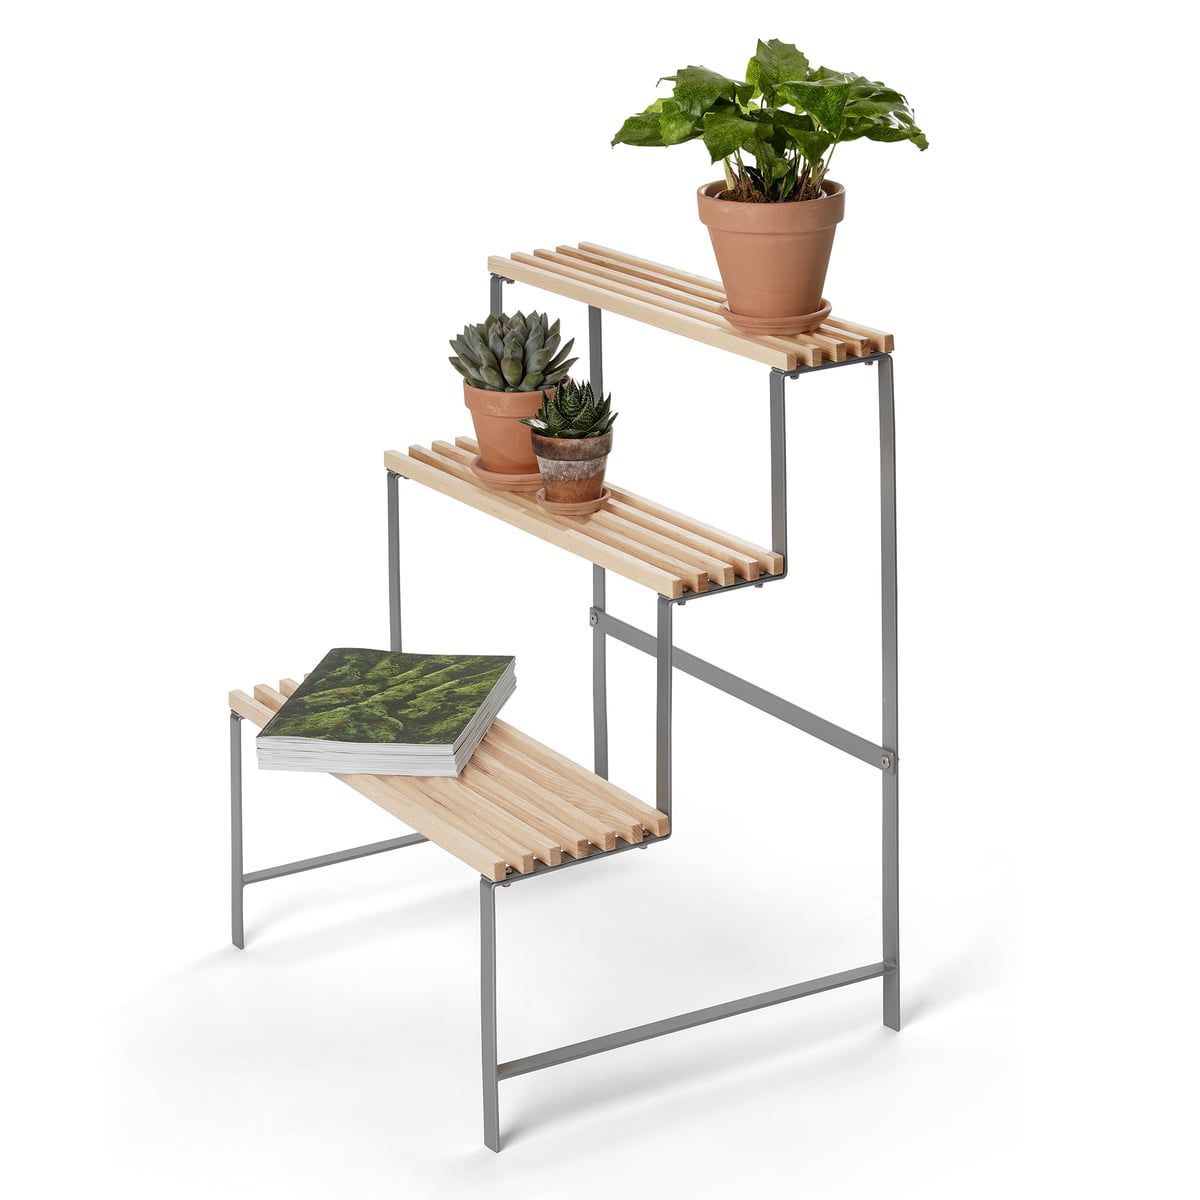 Outdoor a-Stand Design. Pots on Stand. Simple stands